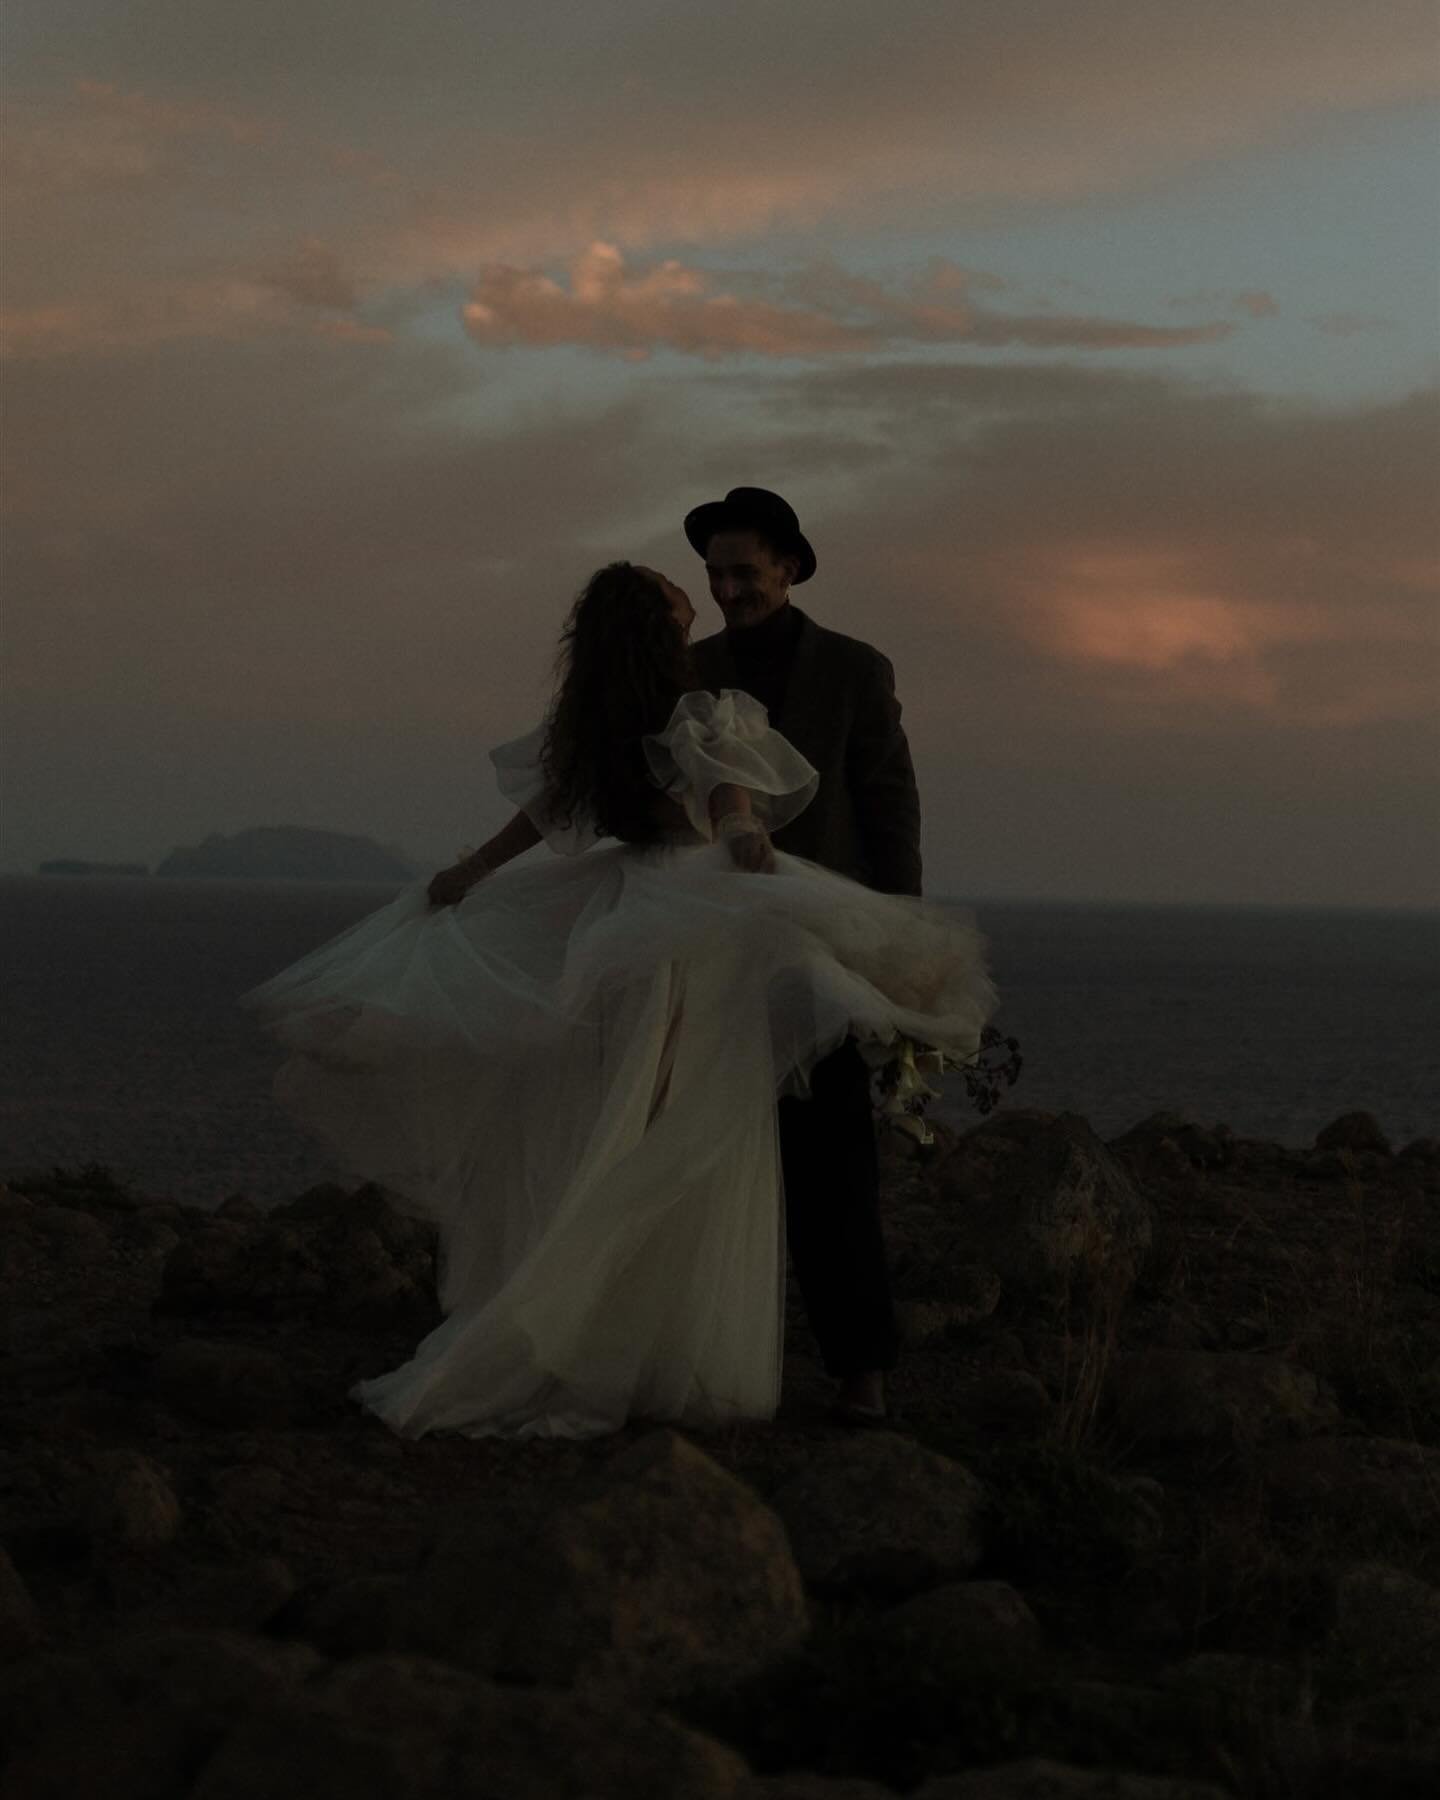 Dancing on the edge of the world, with love as our guide. Madeira&rsquo;s cliffs and the setting sun paint the perfect backdrop for their journey into forever. 

#DestinationDreams #madeiramagic #sunsetvows 

Concept @glowsperience @matiphotography @